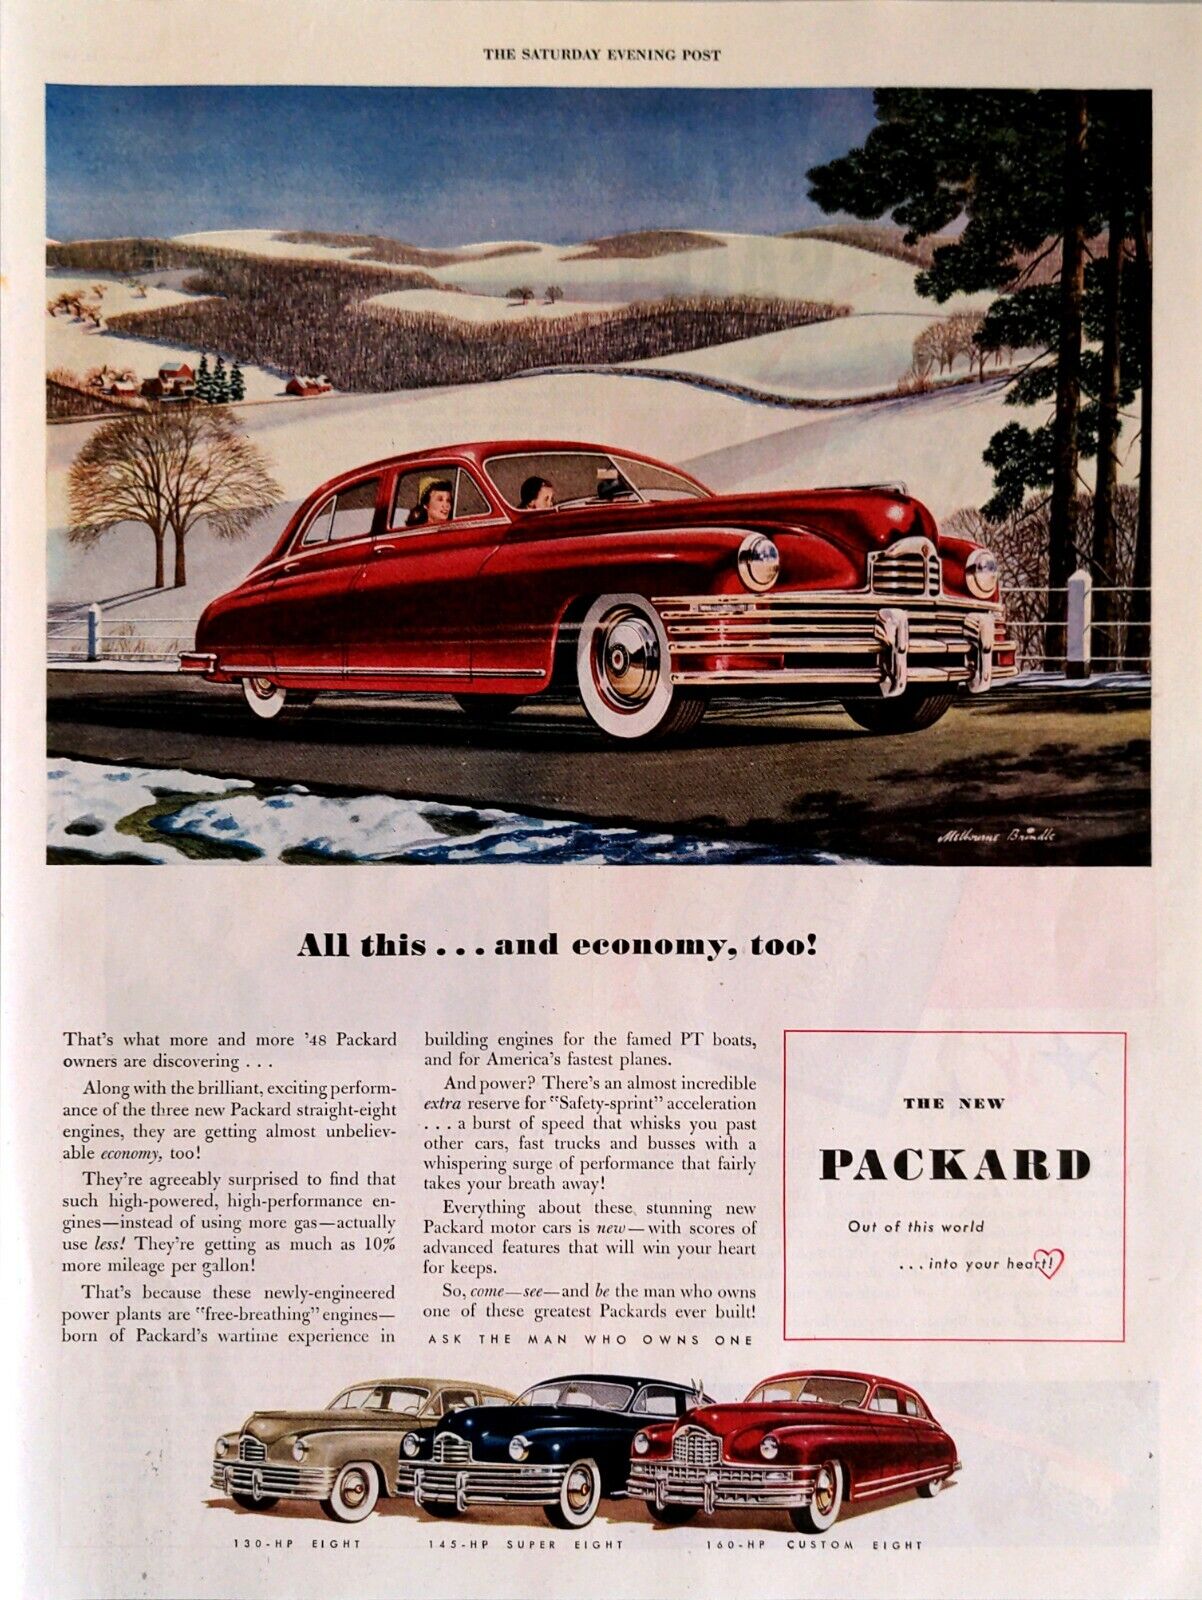 1948 Packard Automobile Out Of This World Into Your Heart Safety Sprint Print Ad